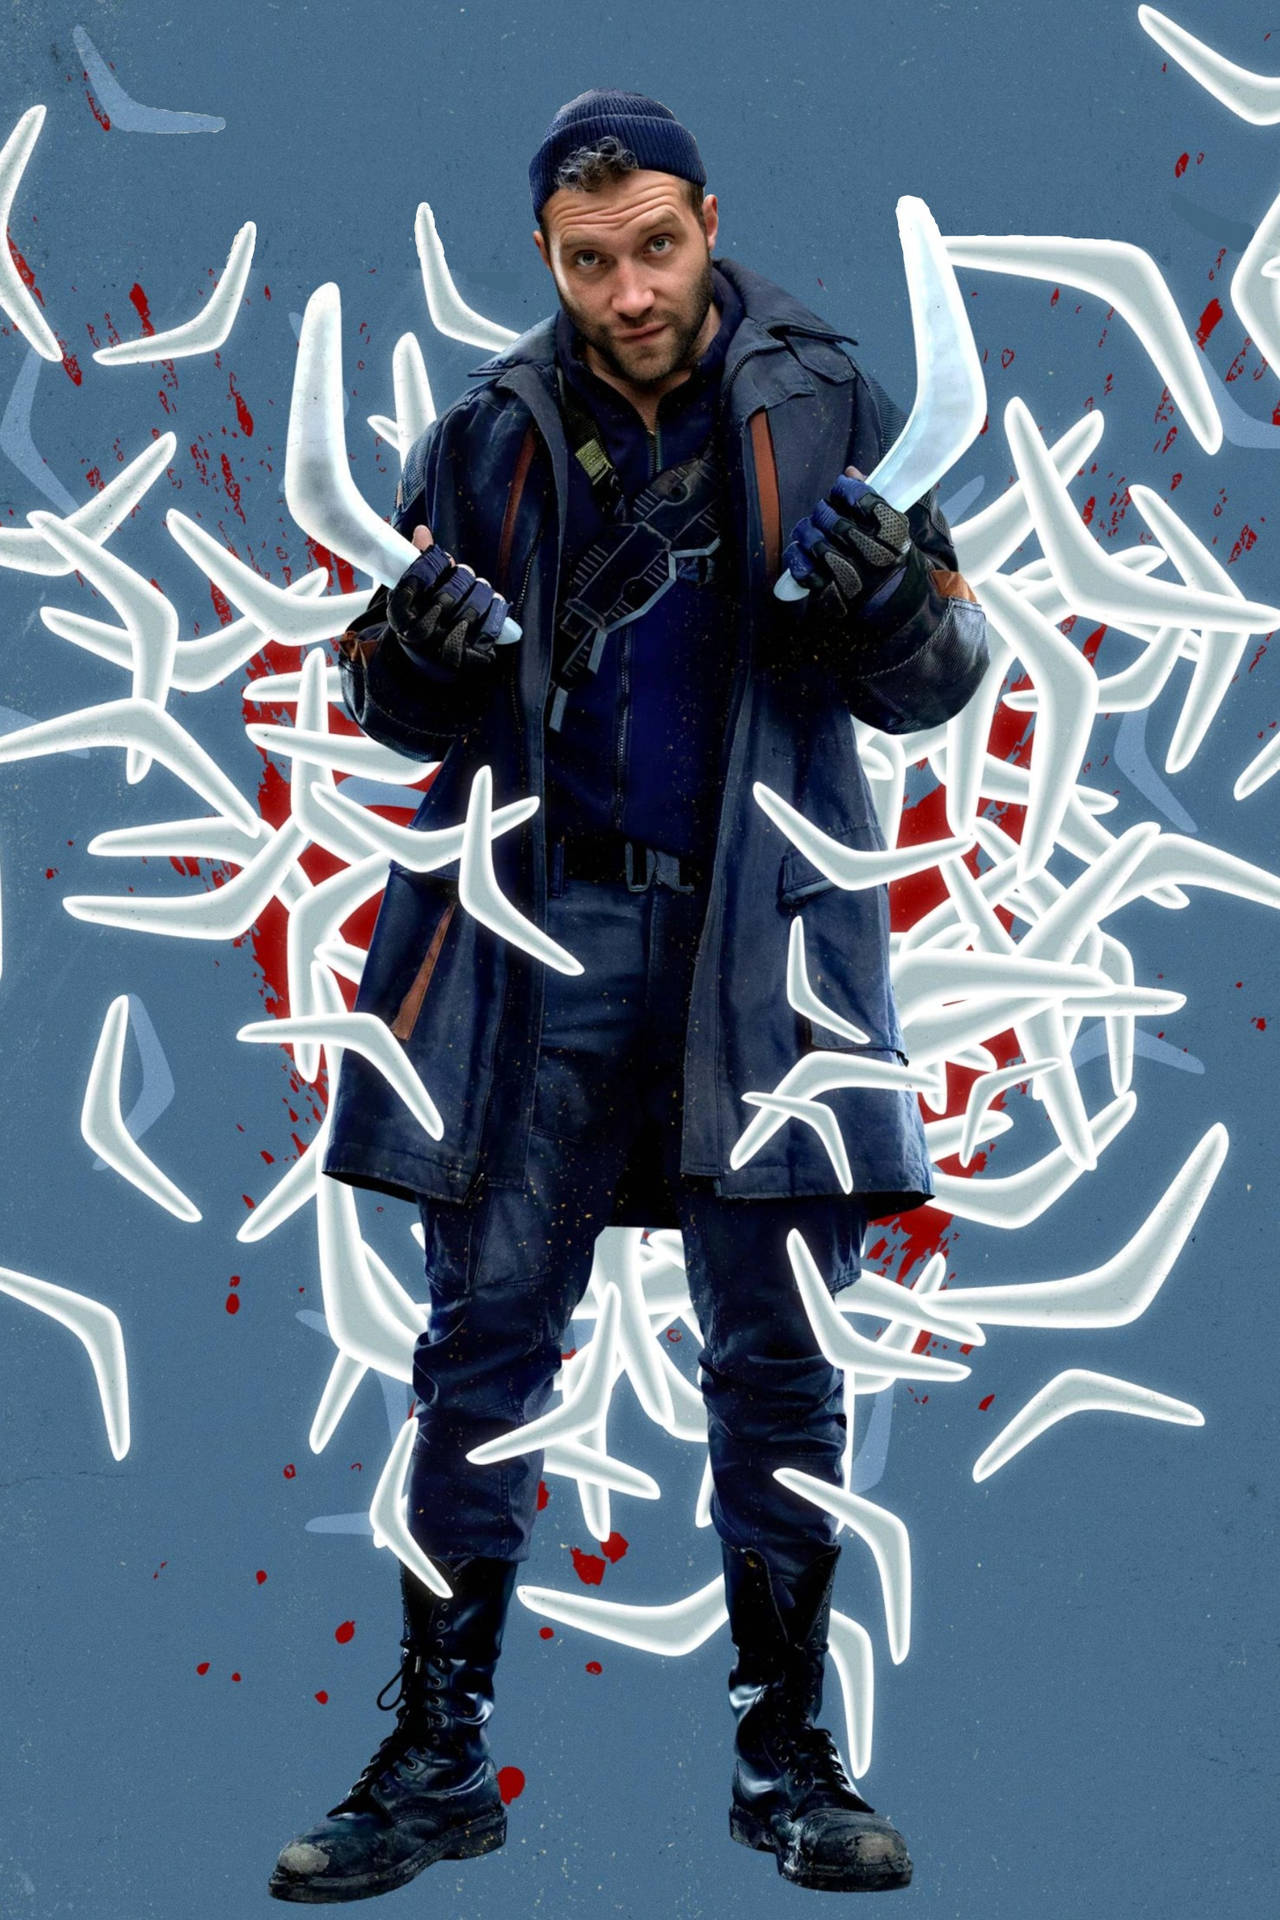 Dc'scaptain Boomerang Becomes The Focus Of This Epic Battle Wallpaper. Experience The Thrill And Excitement As He Takes On His Foes In This Stunning Artwork. Perfect For Any Fan Of The Suicide Squad! Wallpaper